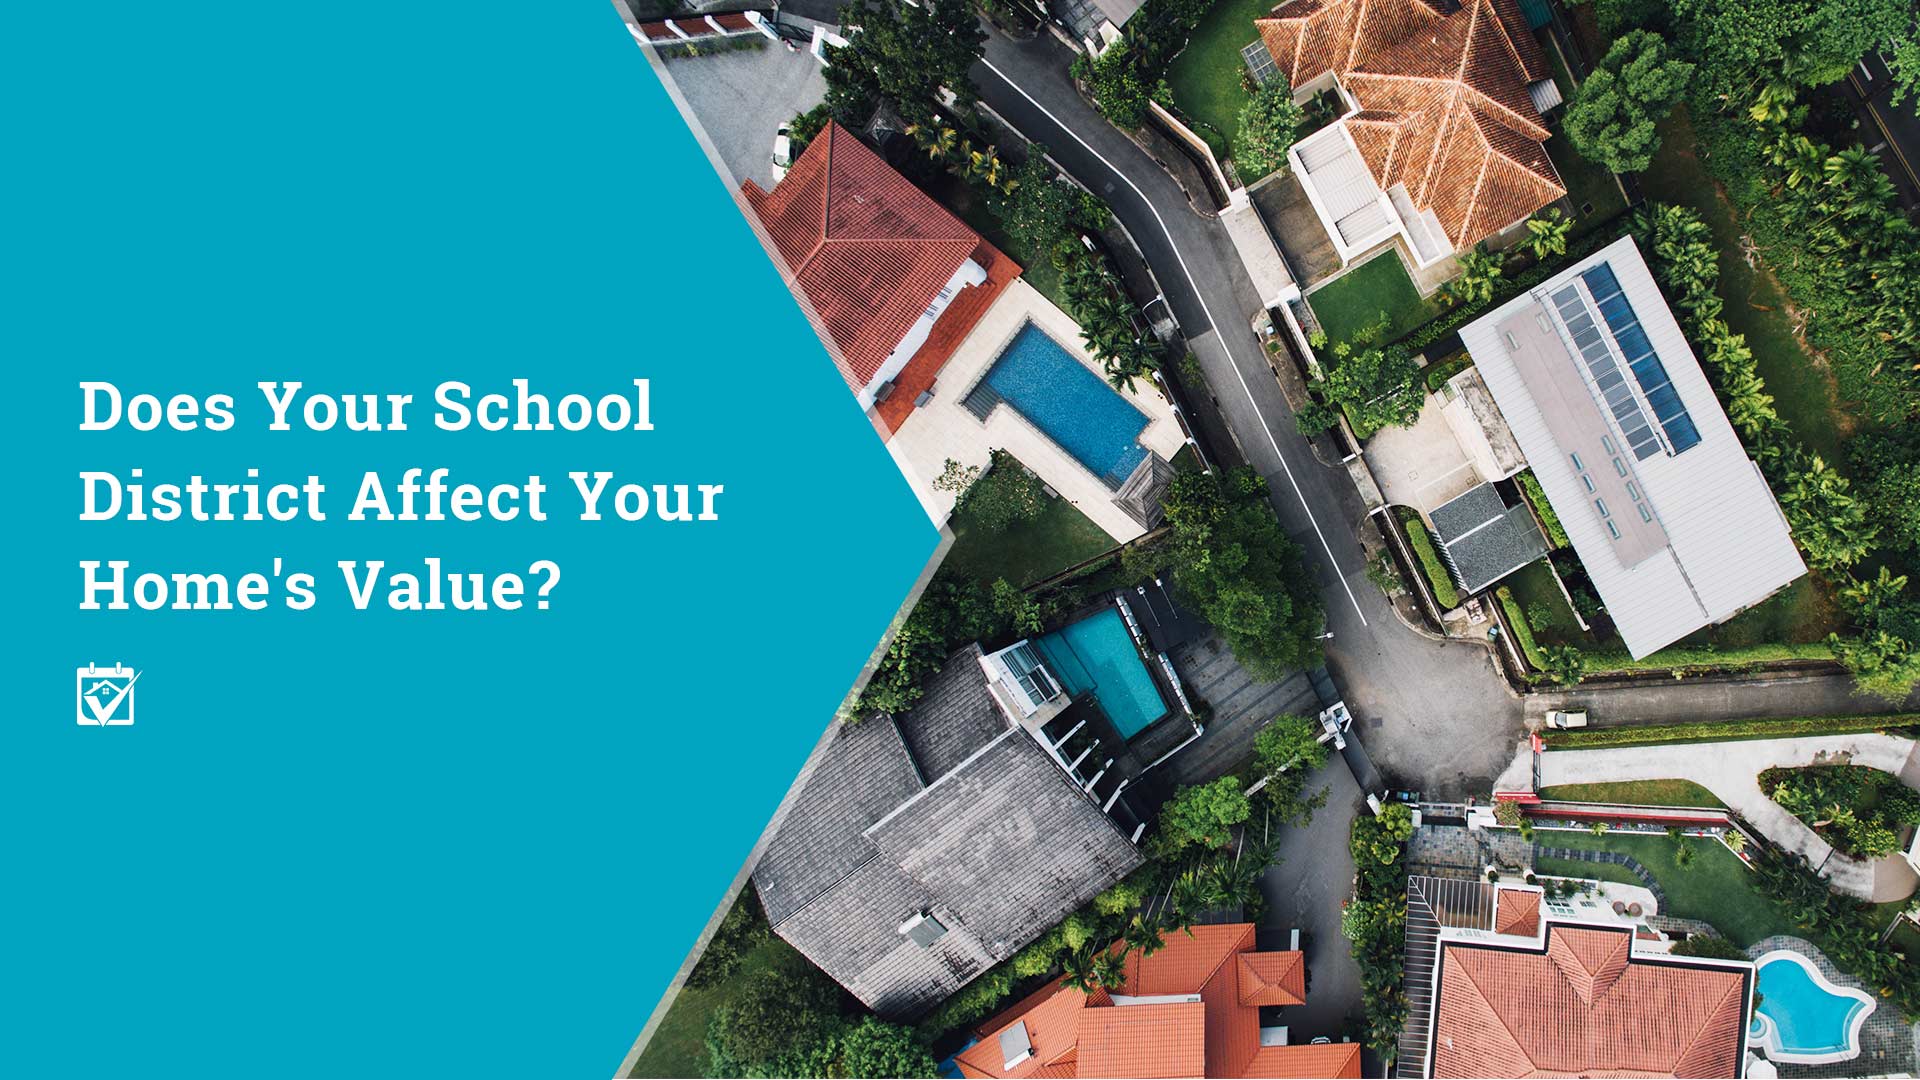 Does Your School District Affect Your Home's Value?